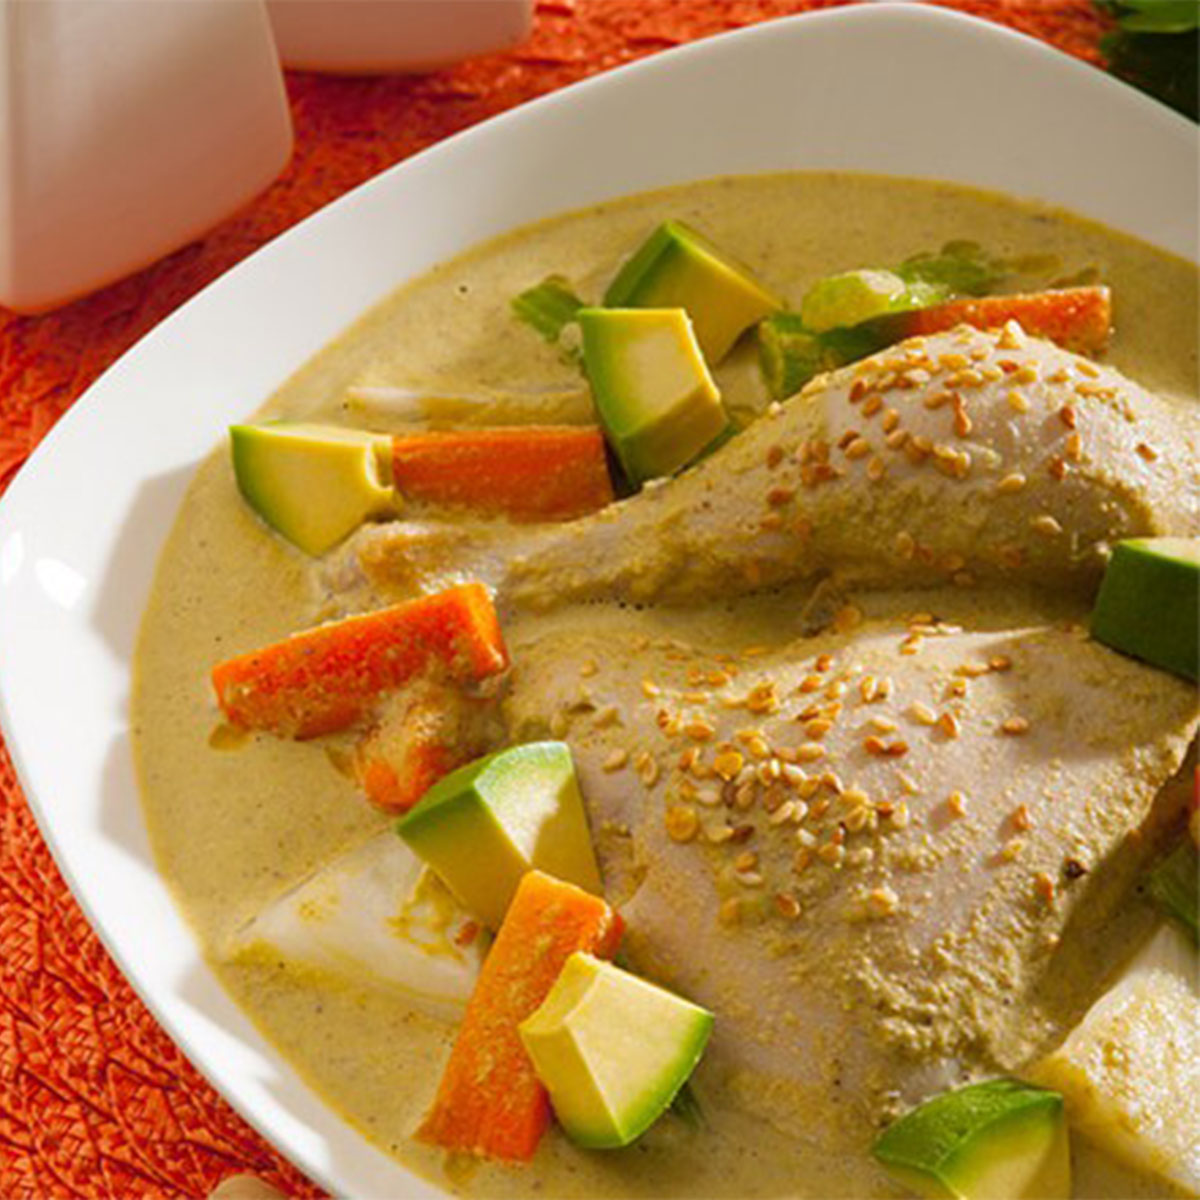 Poached Chicken with Pistachio Sauce